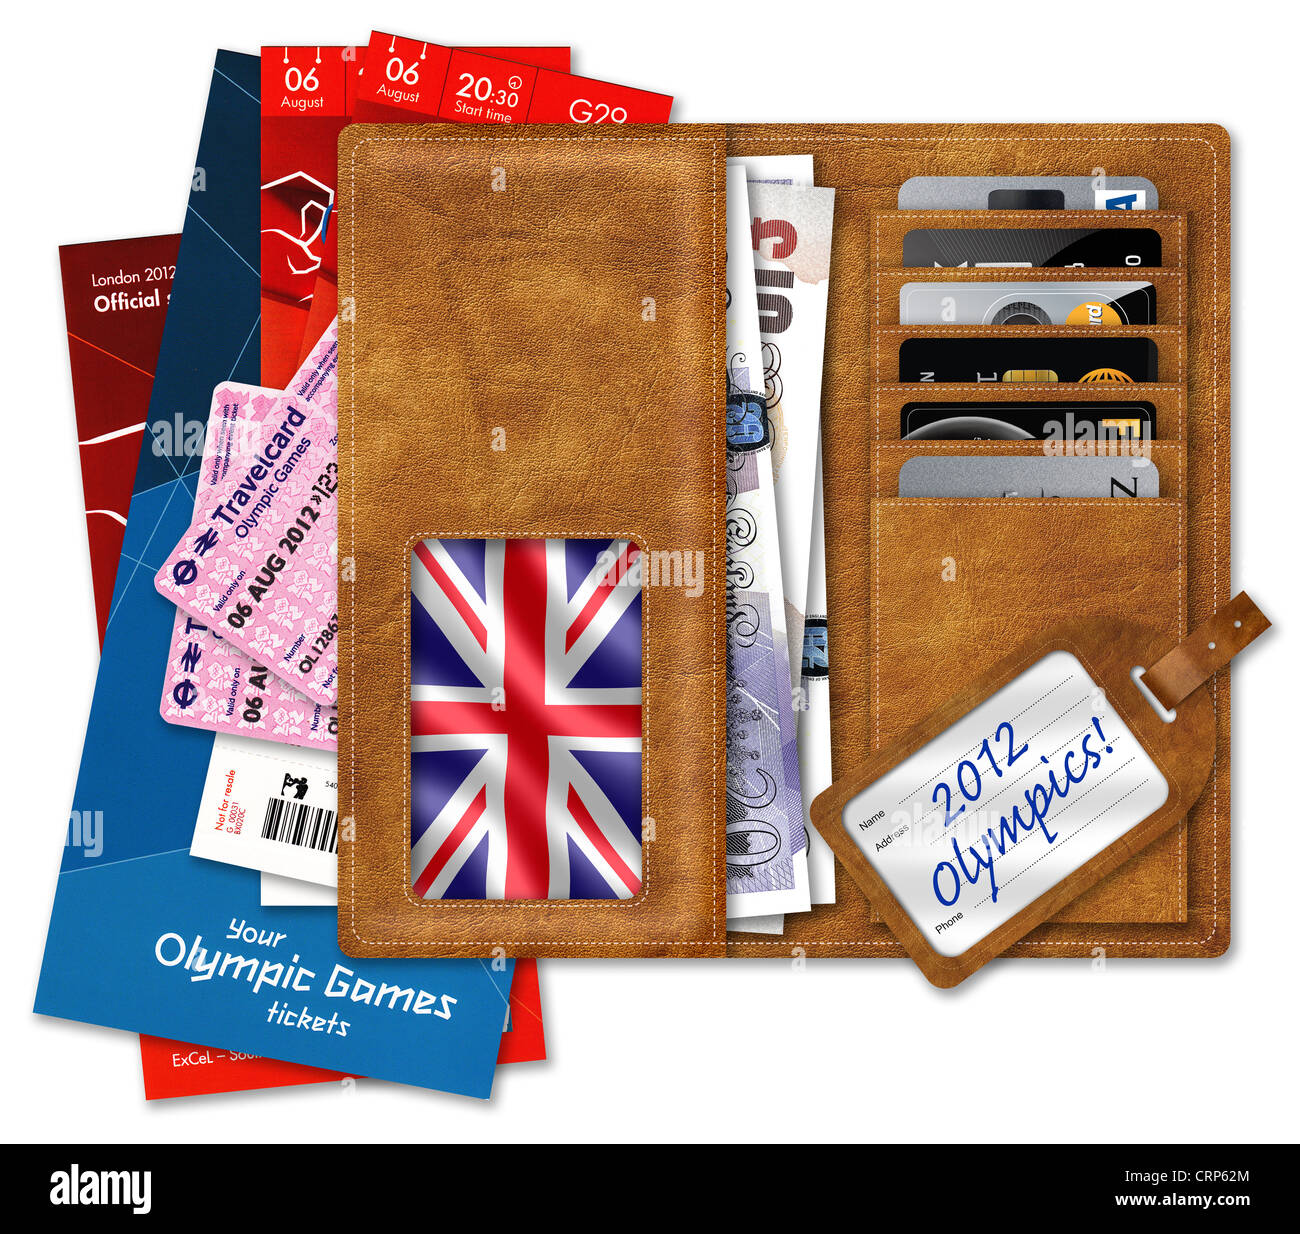 Olympic tickets & documents on wallet with UK Pounds & credit cards, a picture of the UK Flag & 2012 Olympics luggage label. Stock Photo